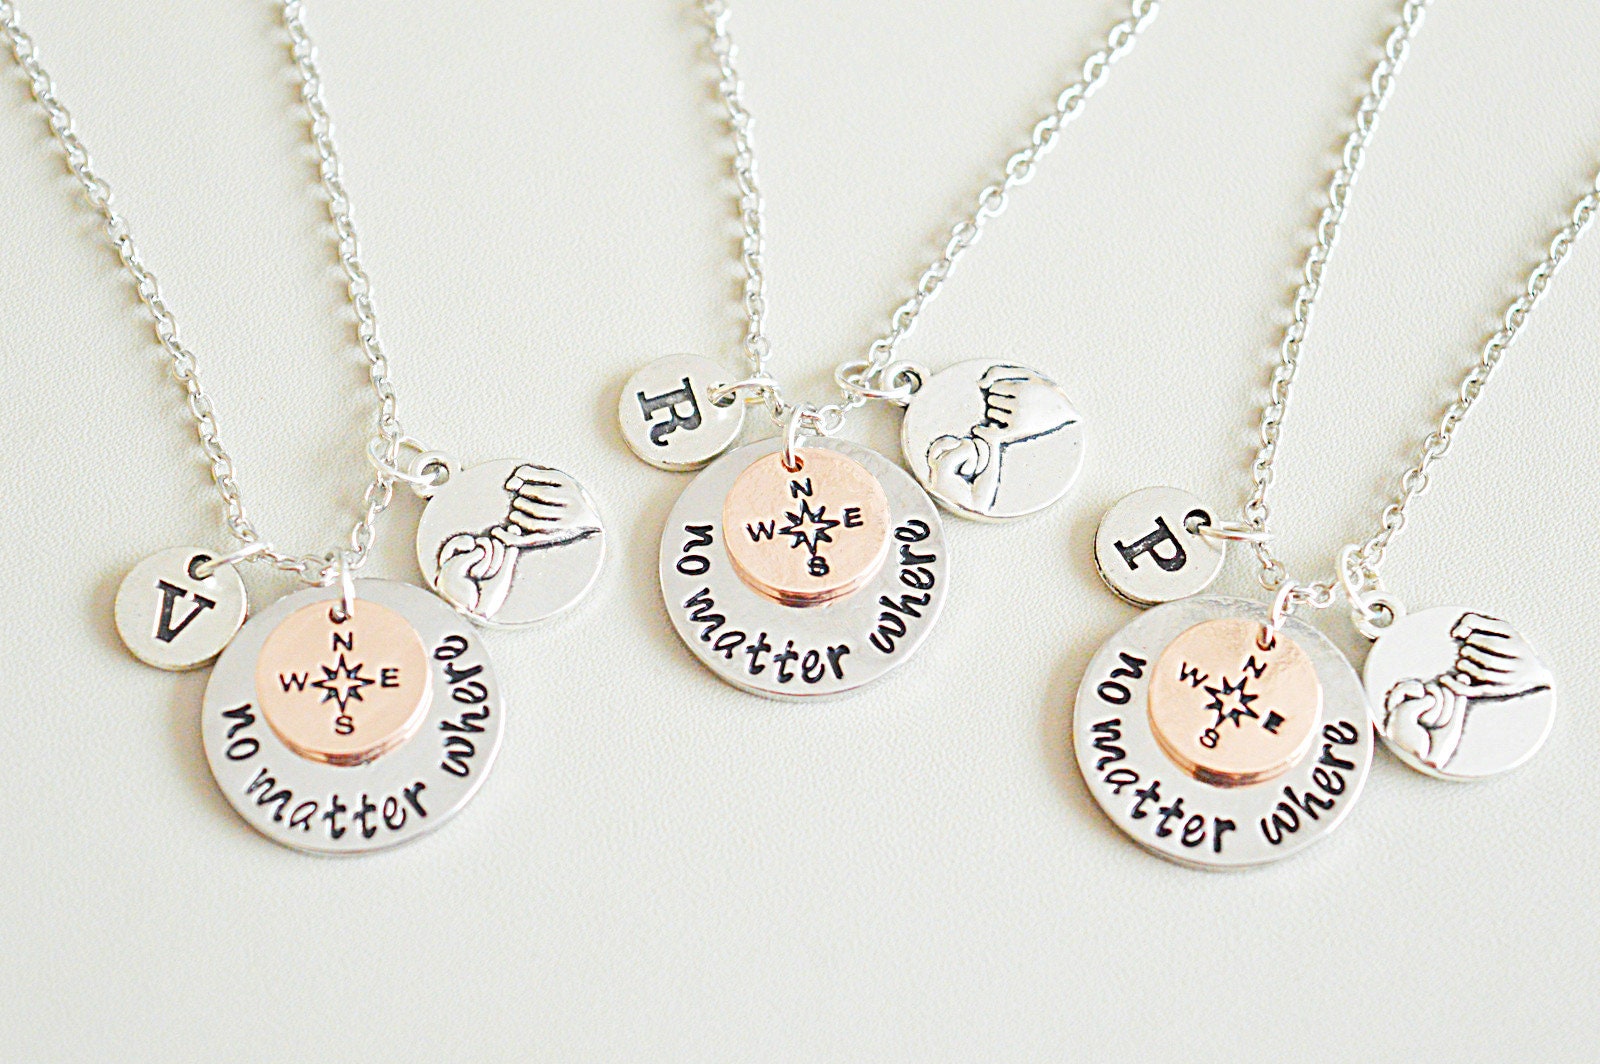 Best Friend, Three Best friends, 3 Piece Best friend Necklace, Set of 3 Necklaces, 3 BFF Necklace,Bff, Best friend gifts,Personalised Gifts